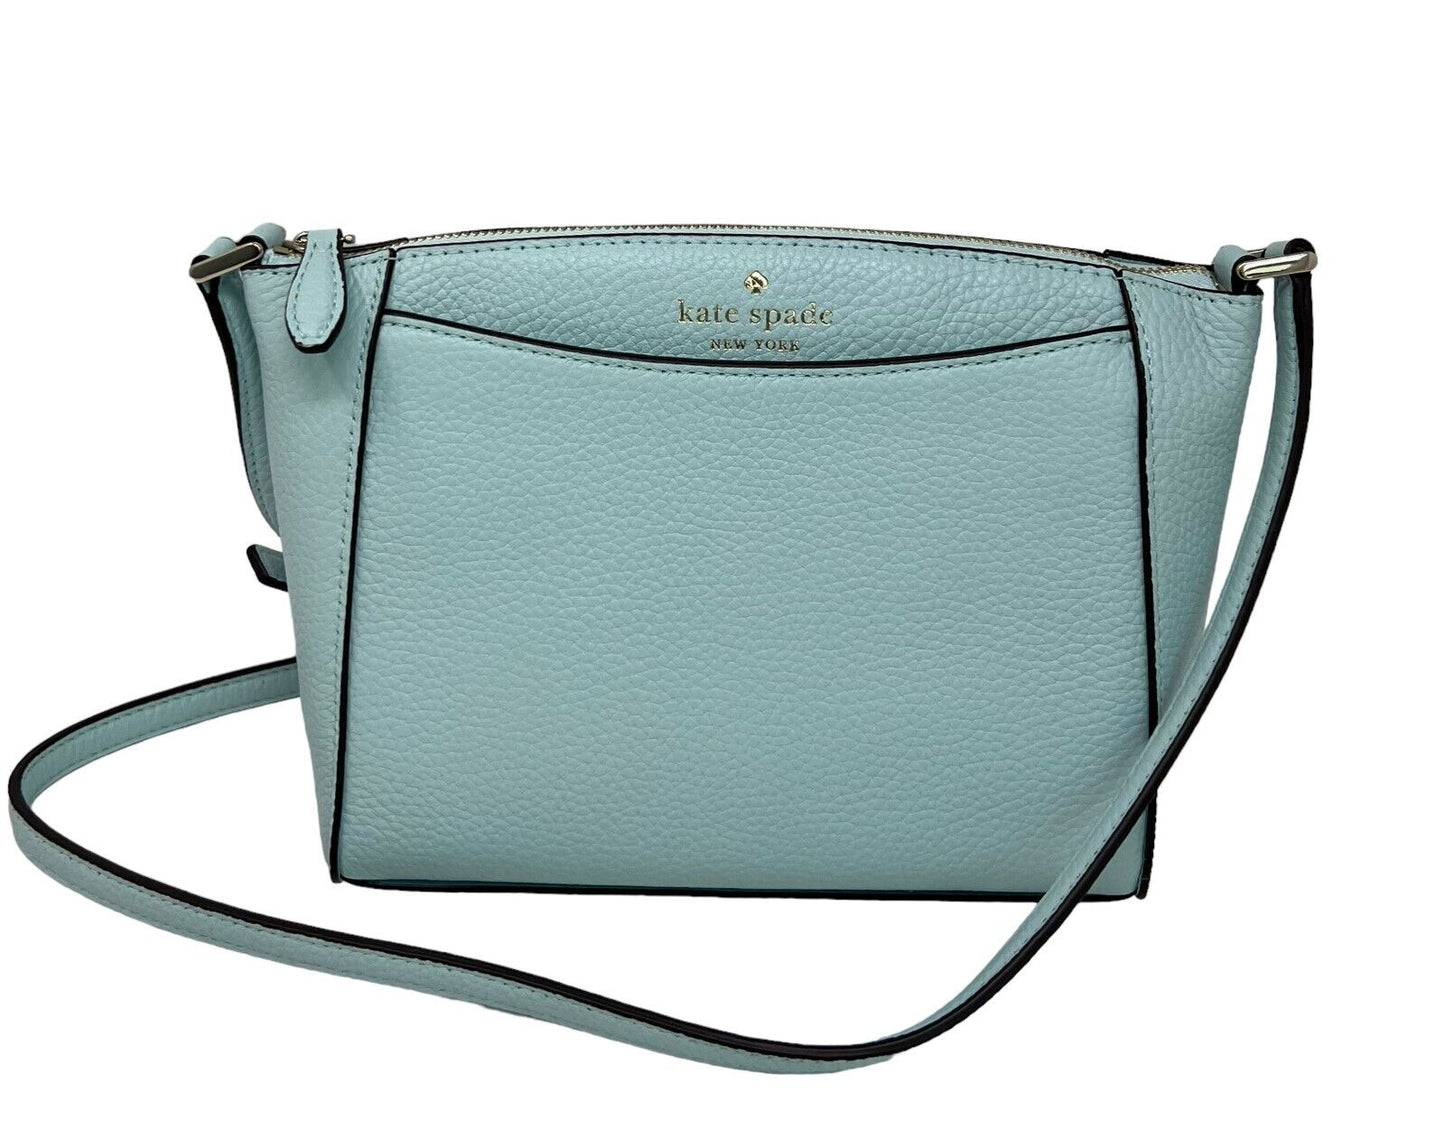 Kate Spade Monica Pebbled Leather Top Zip Small Crossbody Bag WKR00258 $279